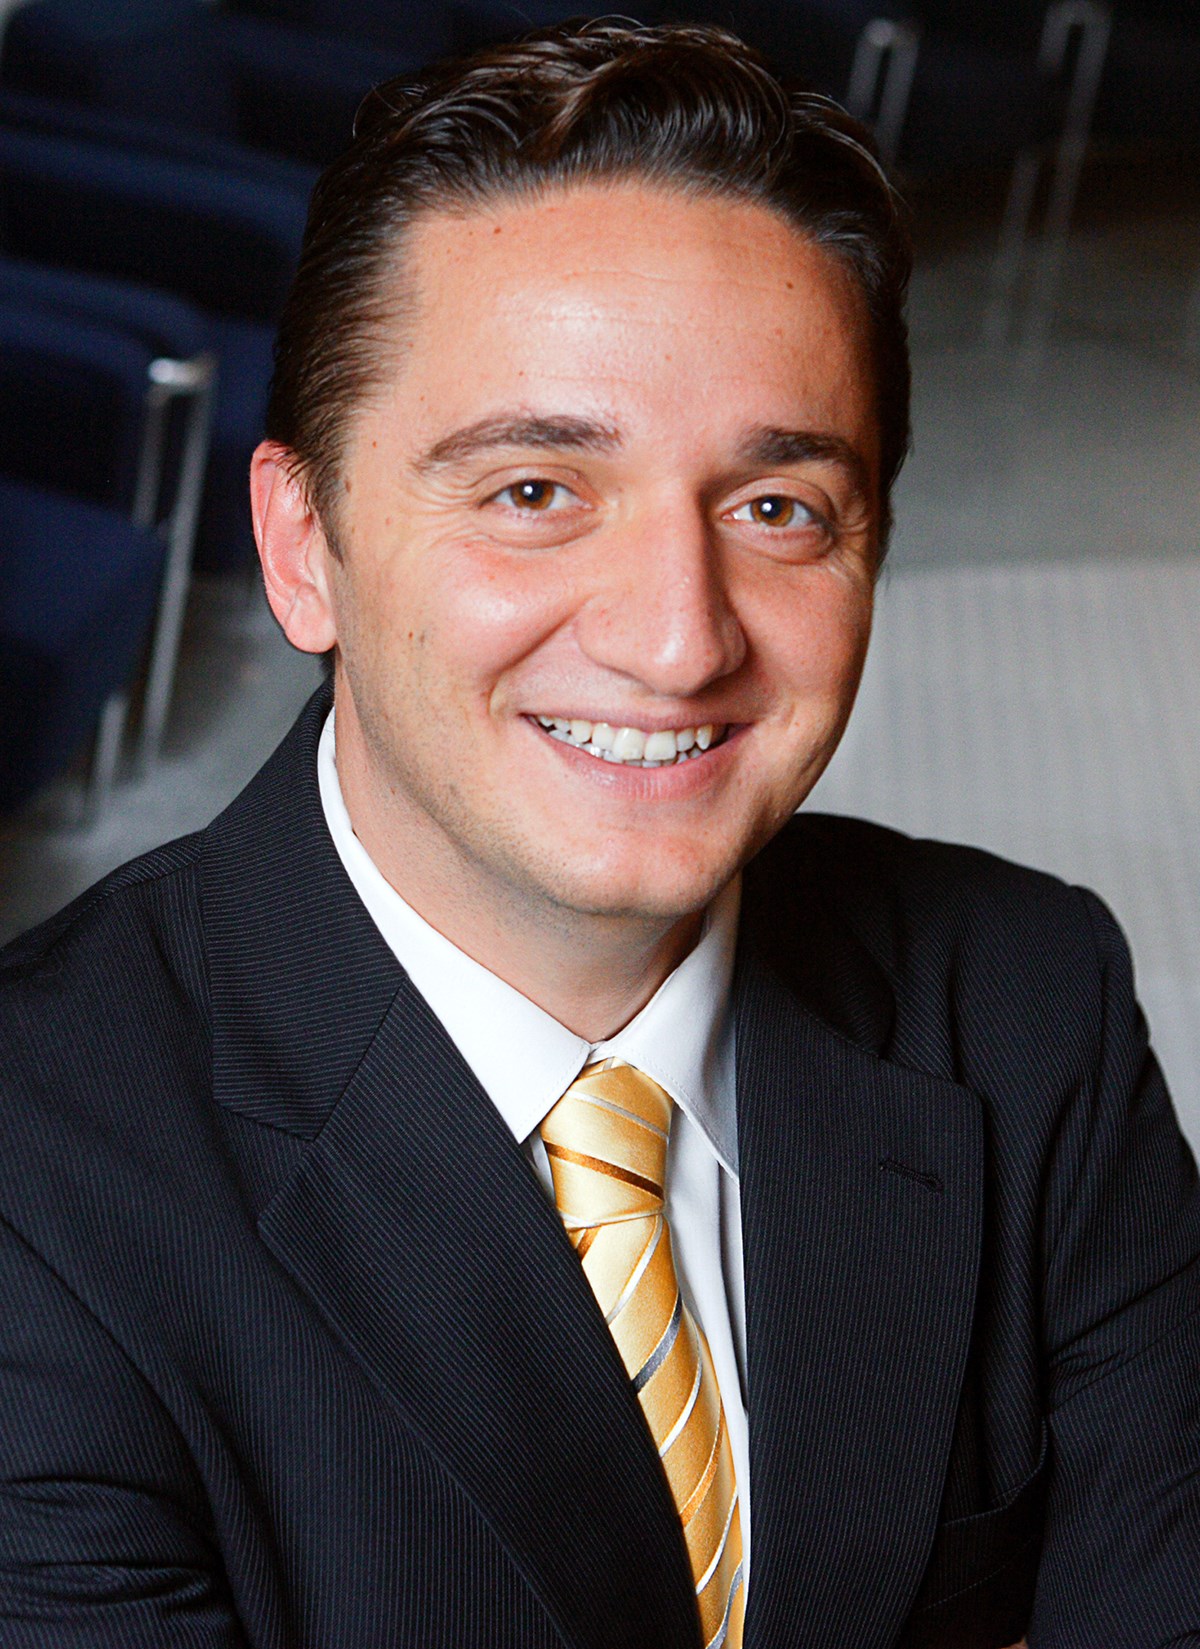 M. Berk Talay is an Associate Professor in the Manning School of Business - Marketing Entrepreneurship and Innovation Department at UMass Lowell.